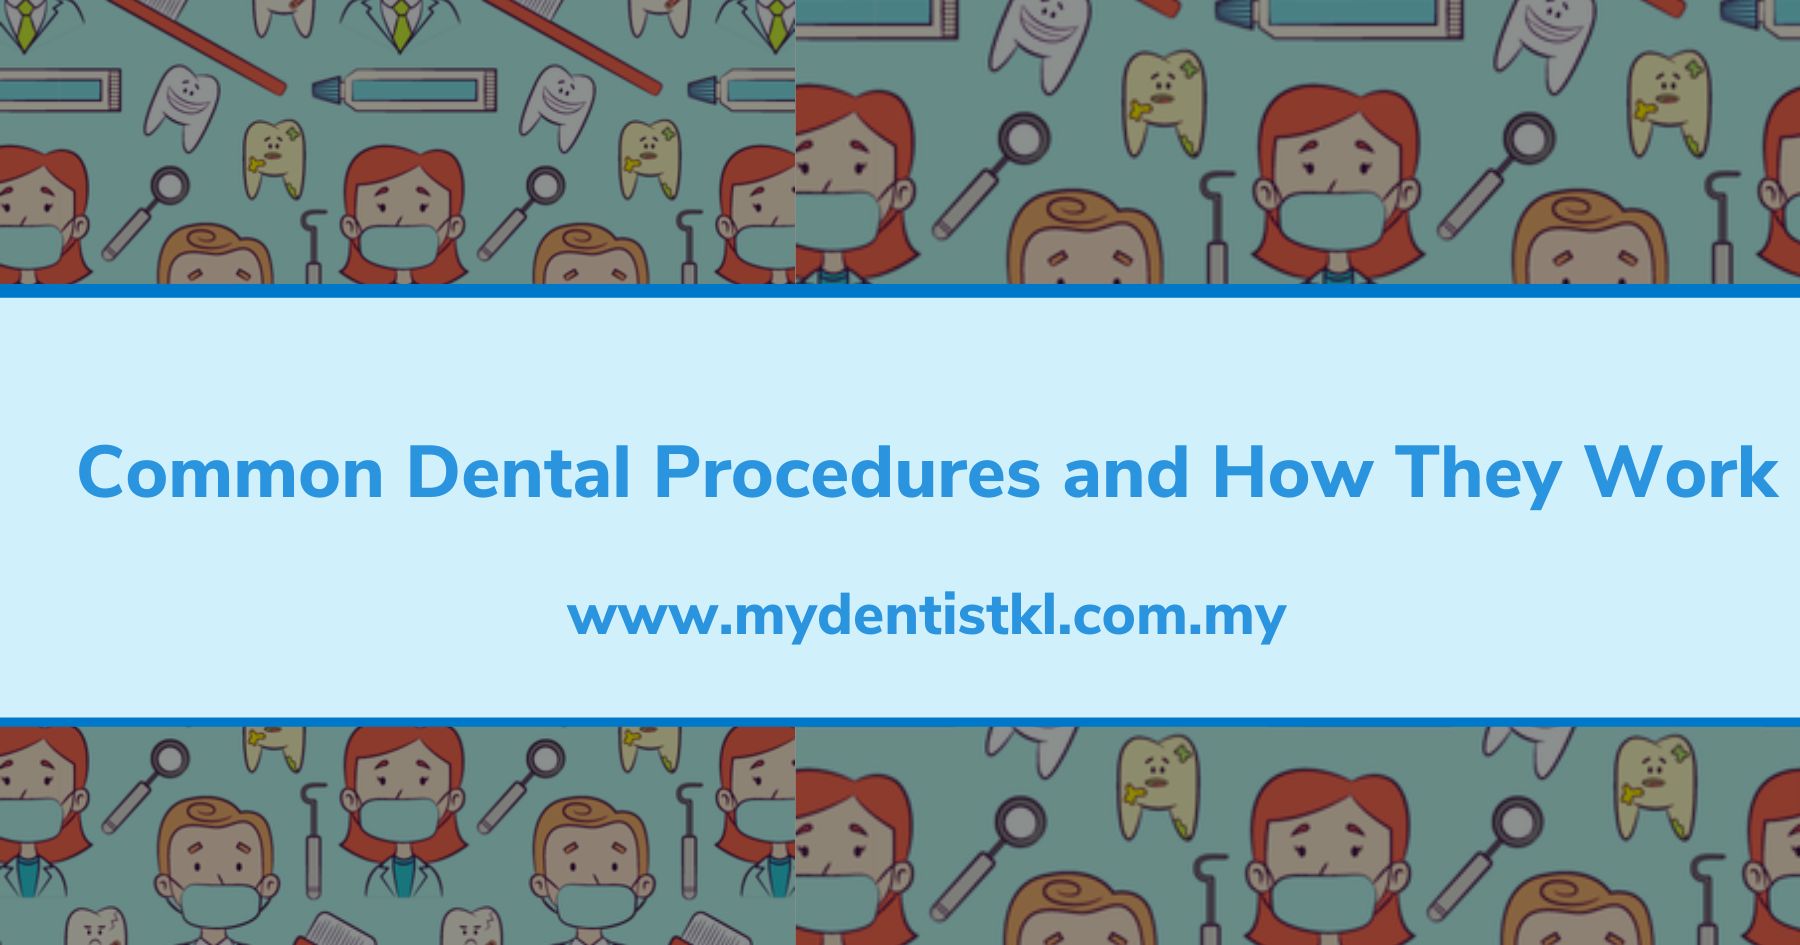 Common Dental Procedures and How They Work